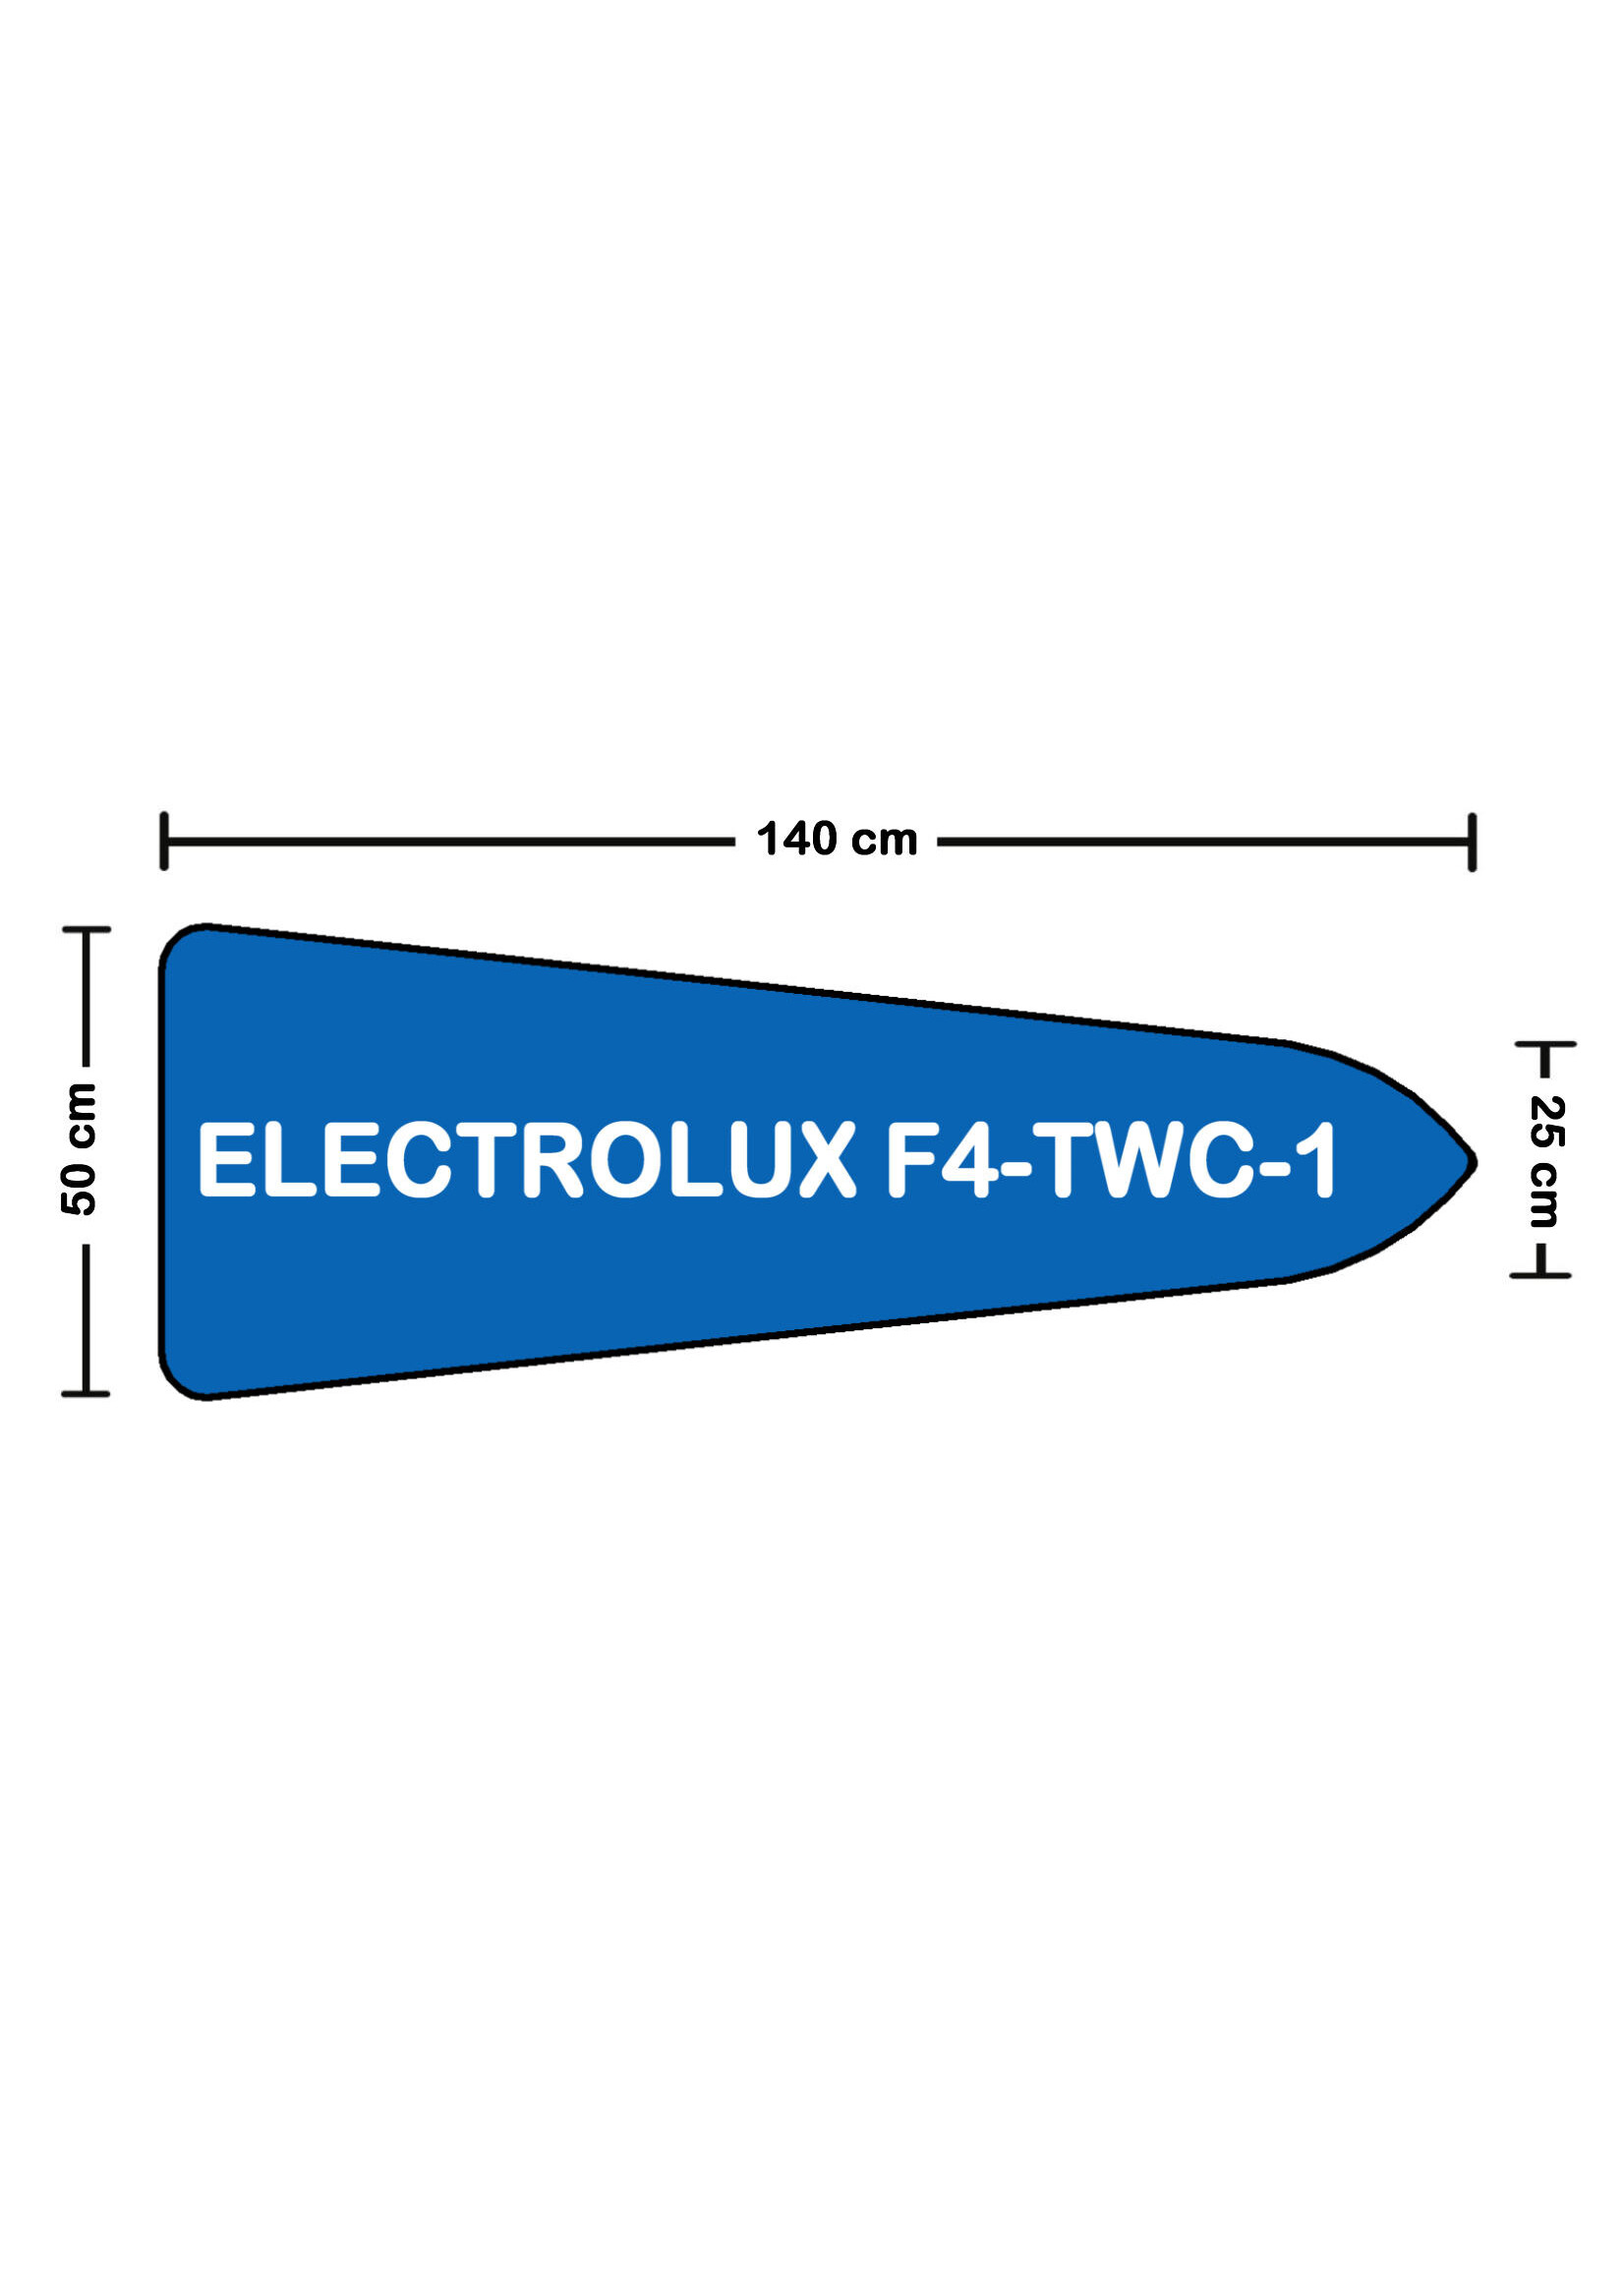 Solana ELECTROLUX F4-TWC-1 cover